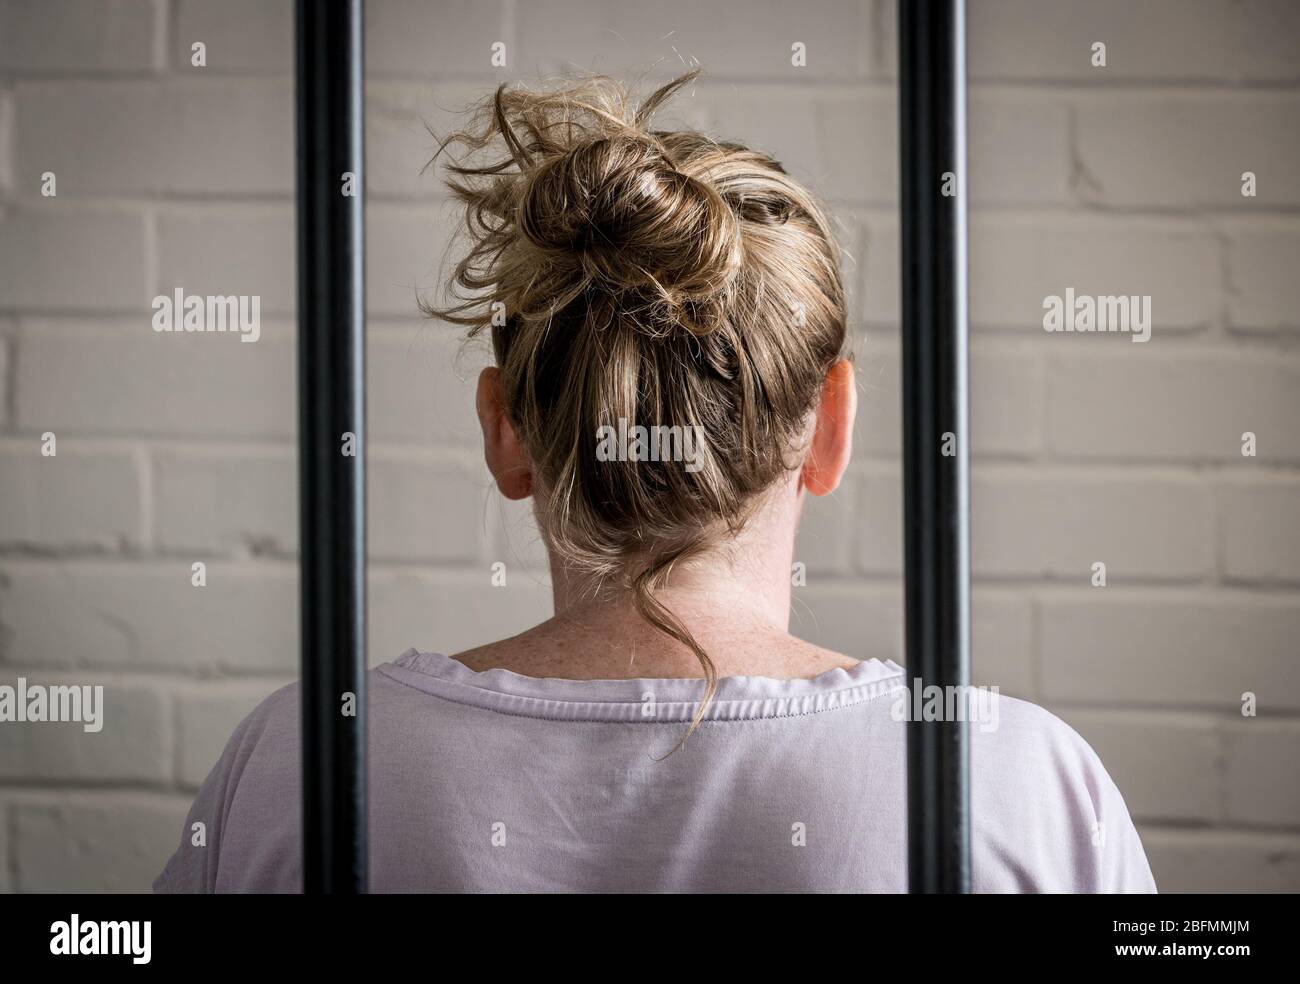 A Female prisoner behind bars in a woman prison. Picture posed by model. Stock Photo